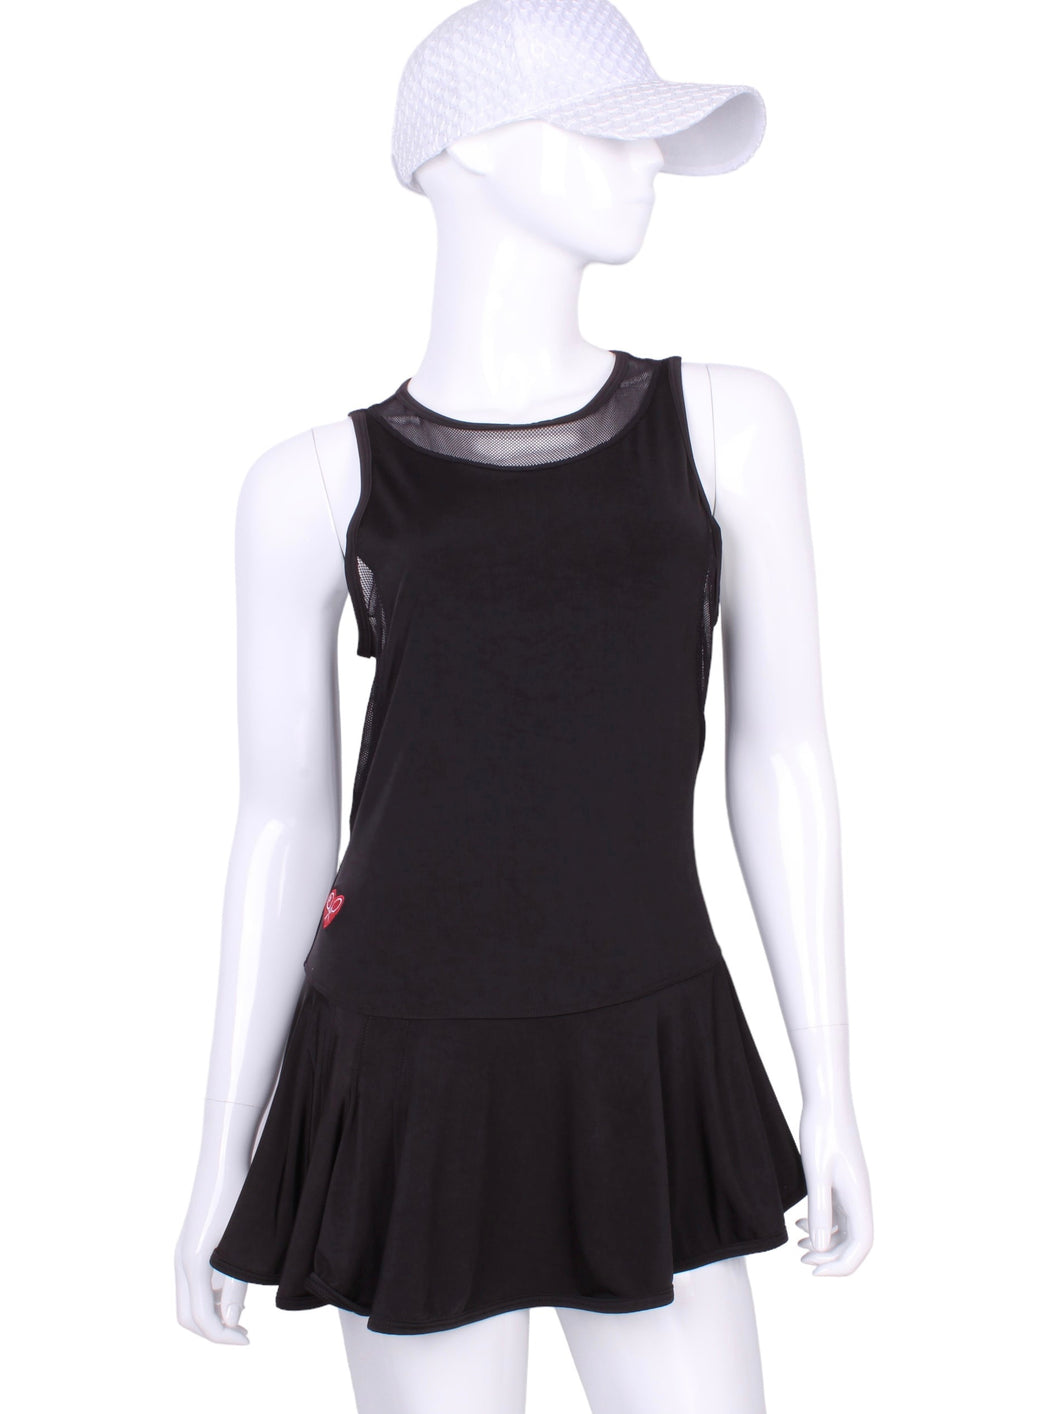 The Andrea Dress offers a playful, fun, and very flirty look. It is perfect for tennis, running and golf (with our Leg Lengthening Leggings), and of course, a trip to your after-court party with your friends. It was designed for confident women like you!